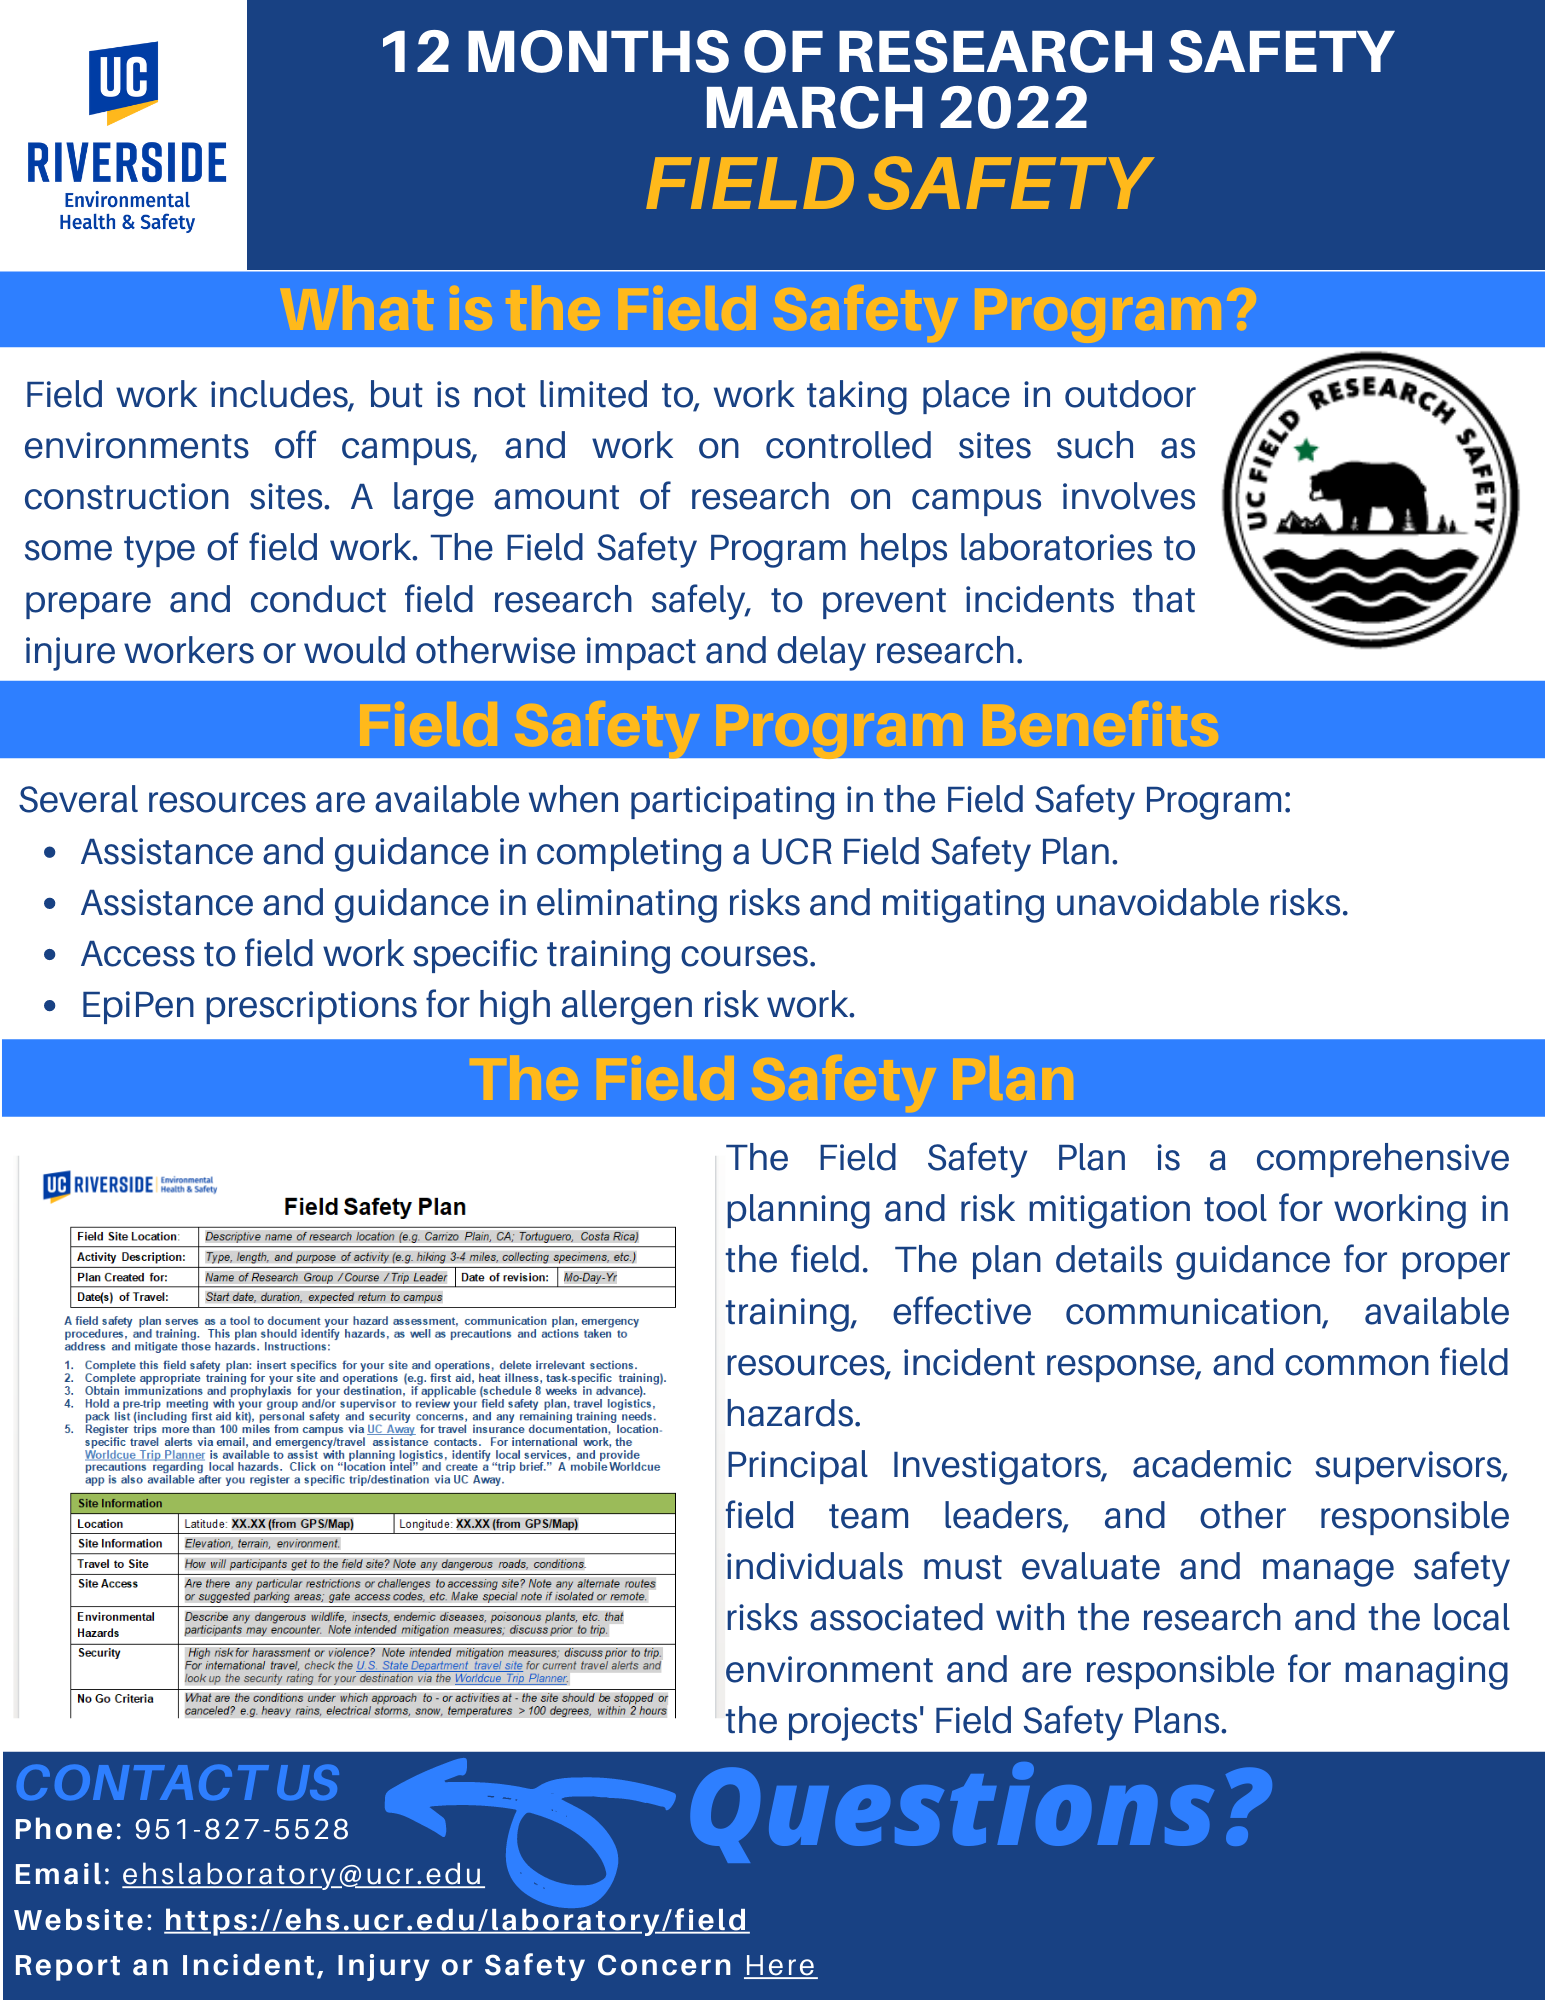 Research Safety_ March2022-Field-Safety-1